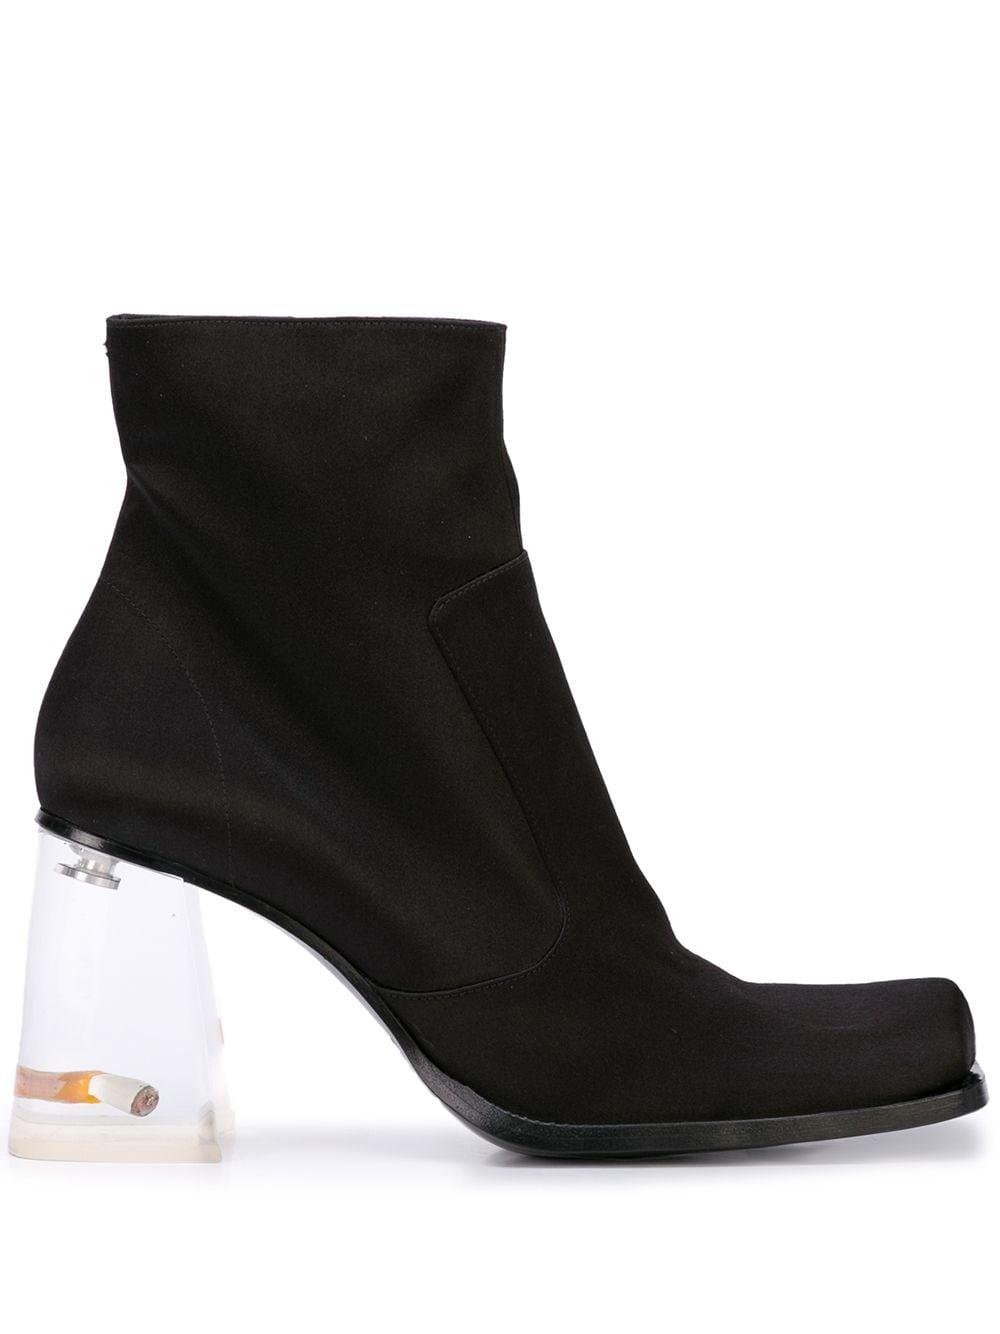 Maison Margiela Rose And Cigarette Heel Ankle Boots in Black | Lyst